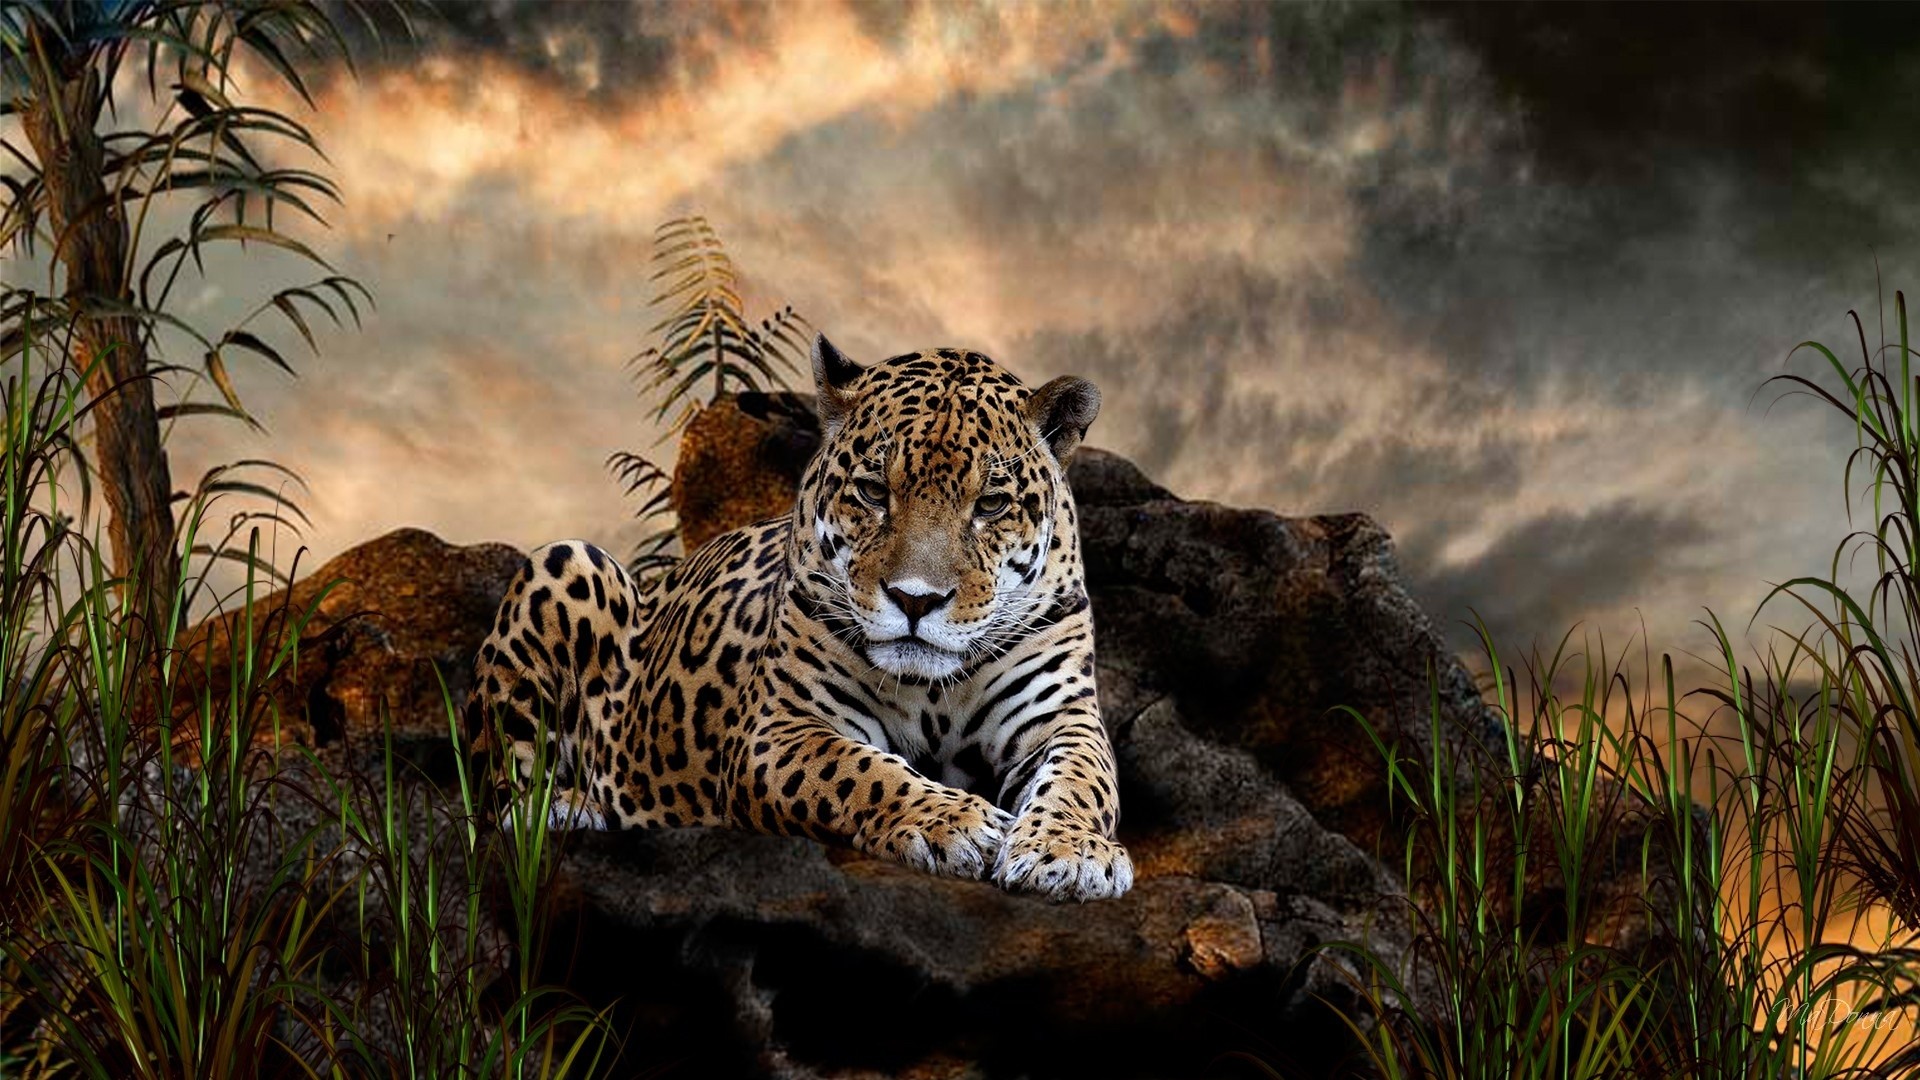 Wildlife Wallpapers And Screensavers (69+ Images)